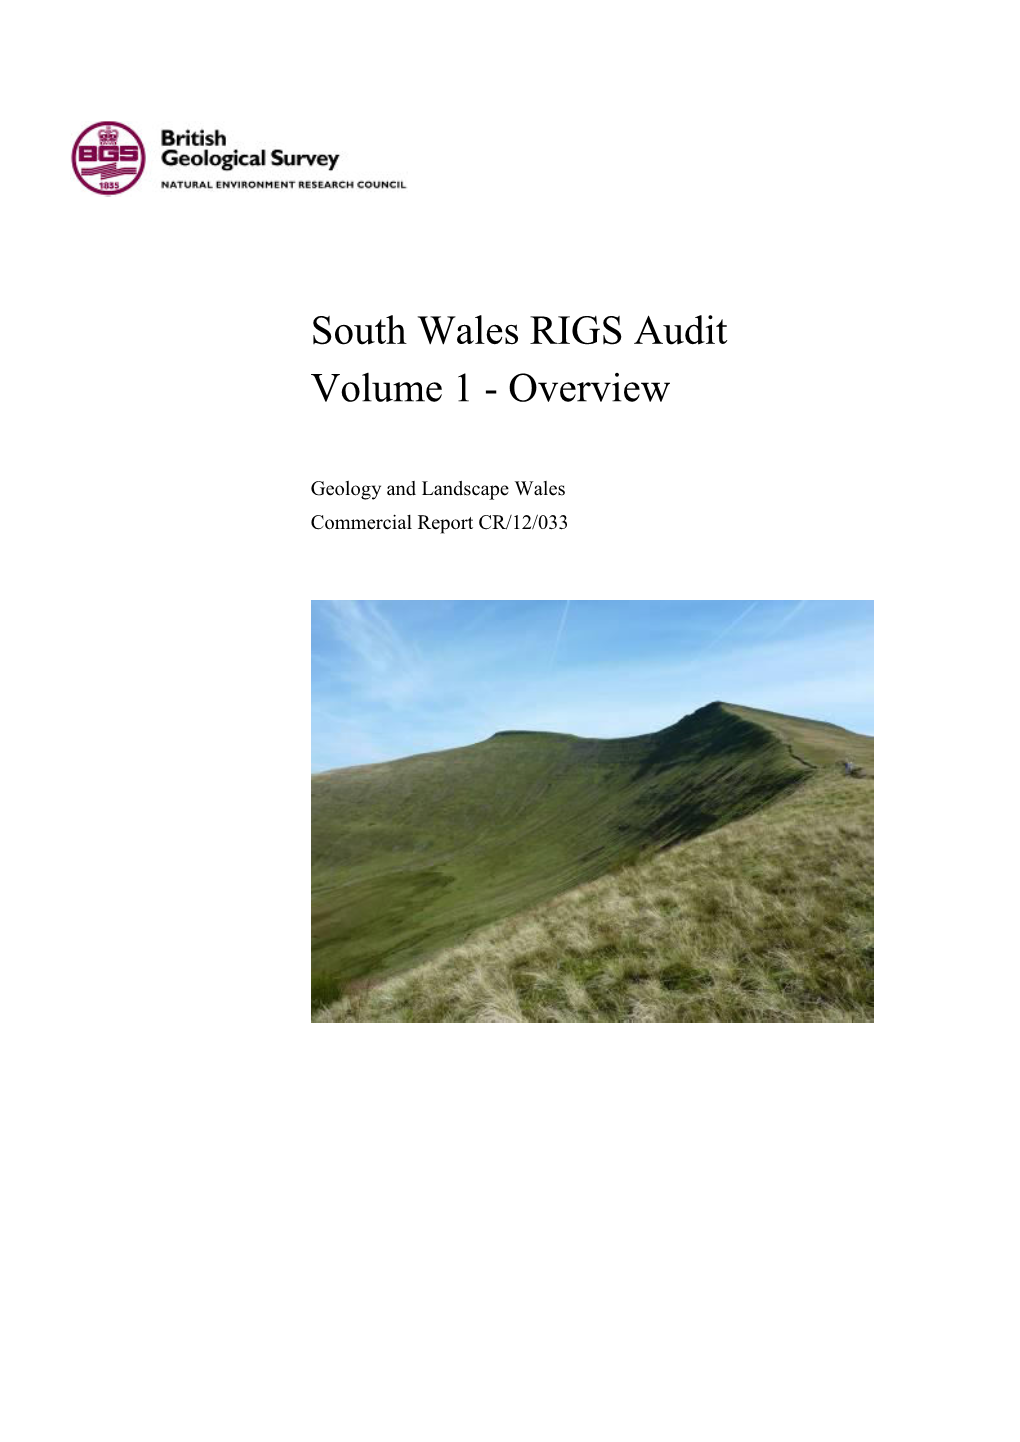 South Wales Regionally Important Geological Sites Audit March 2012